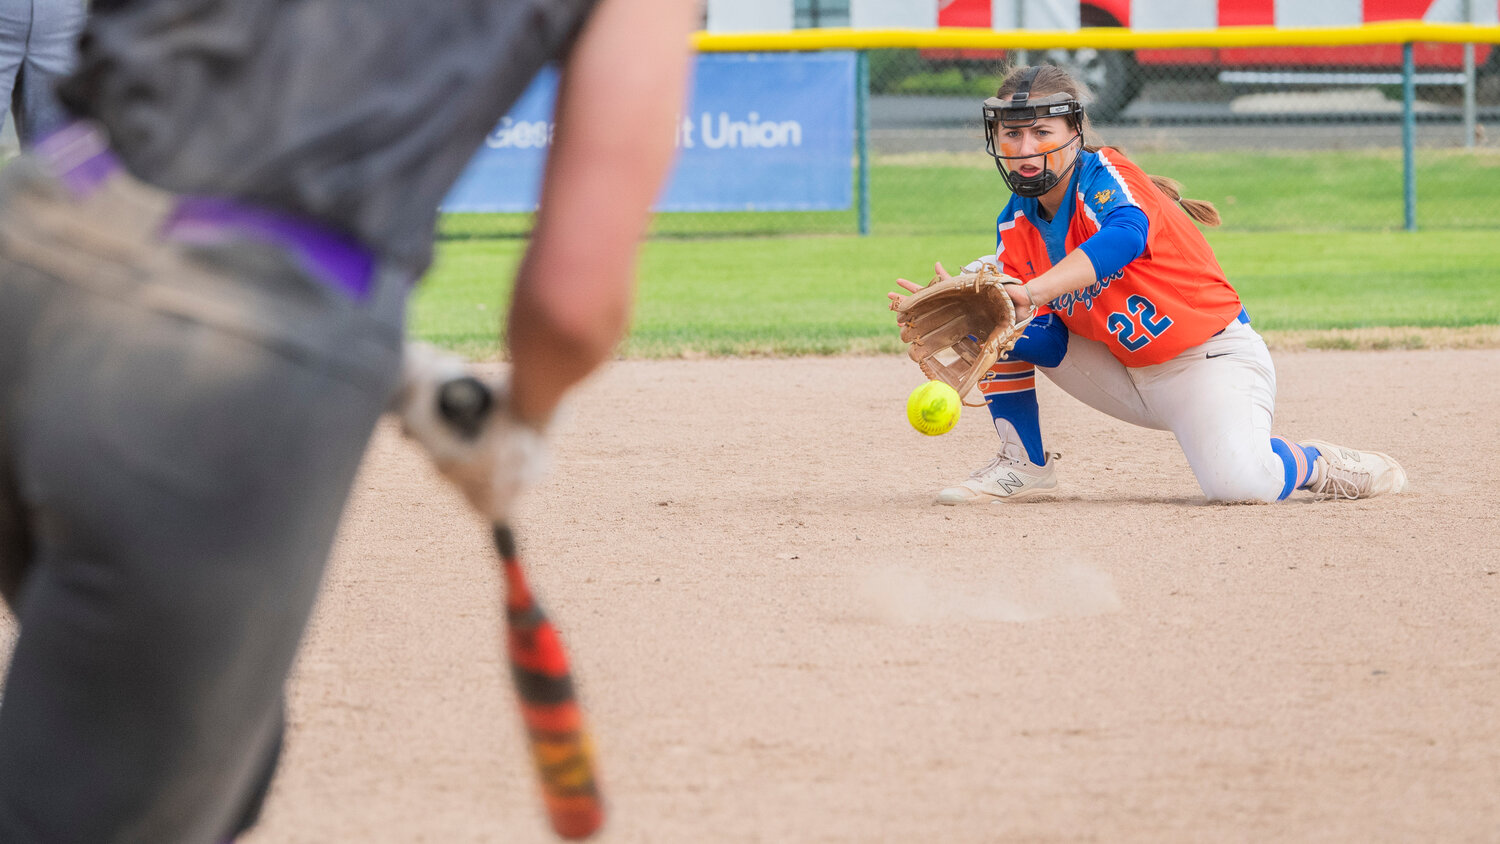 Ridgefield’s Madison Walker (22) stops a ground ball and makes an out during a state title game against North Kitsap at Carlon Park in Selah on Saturday, May 27.